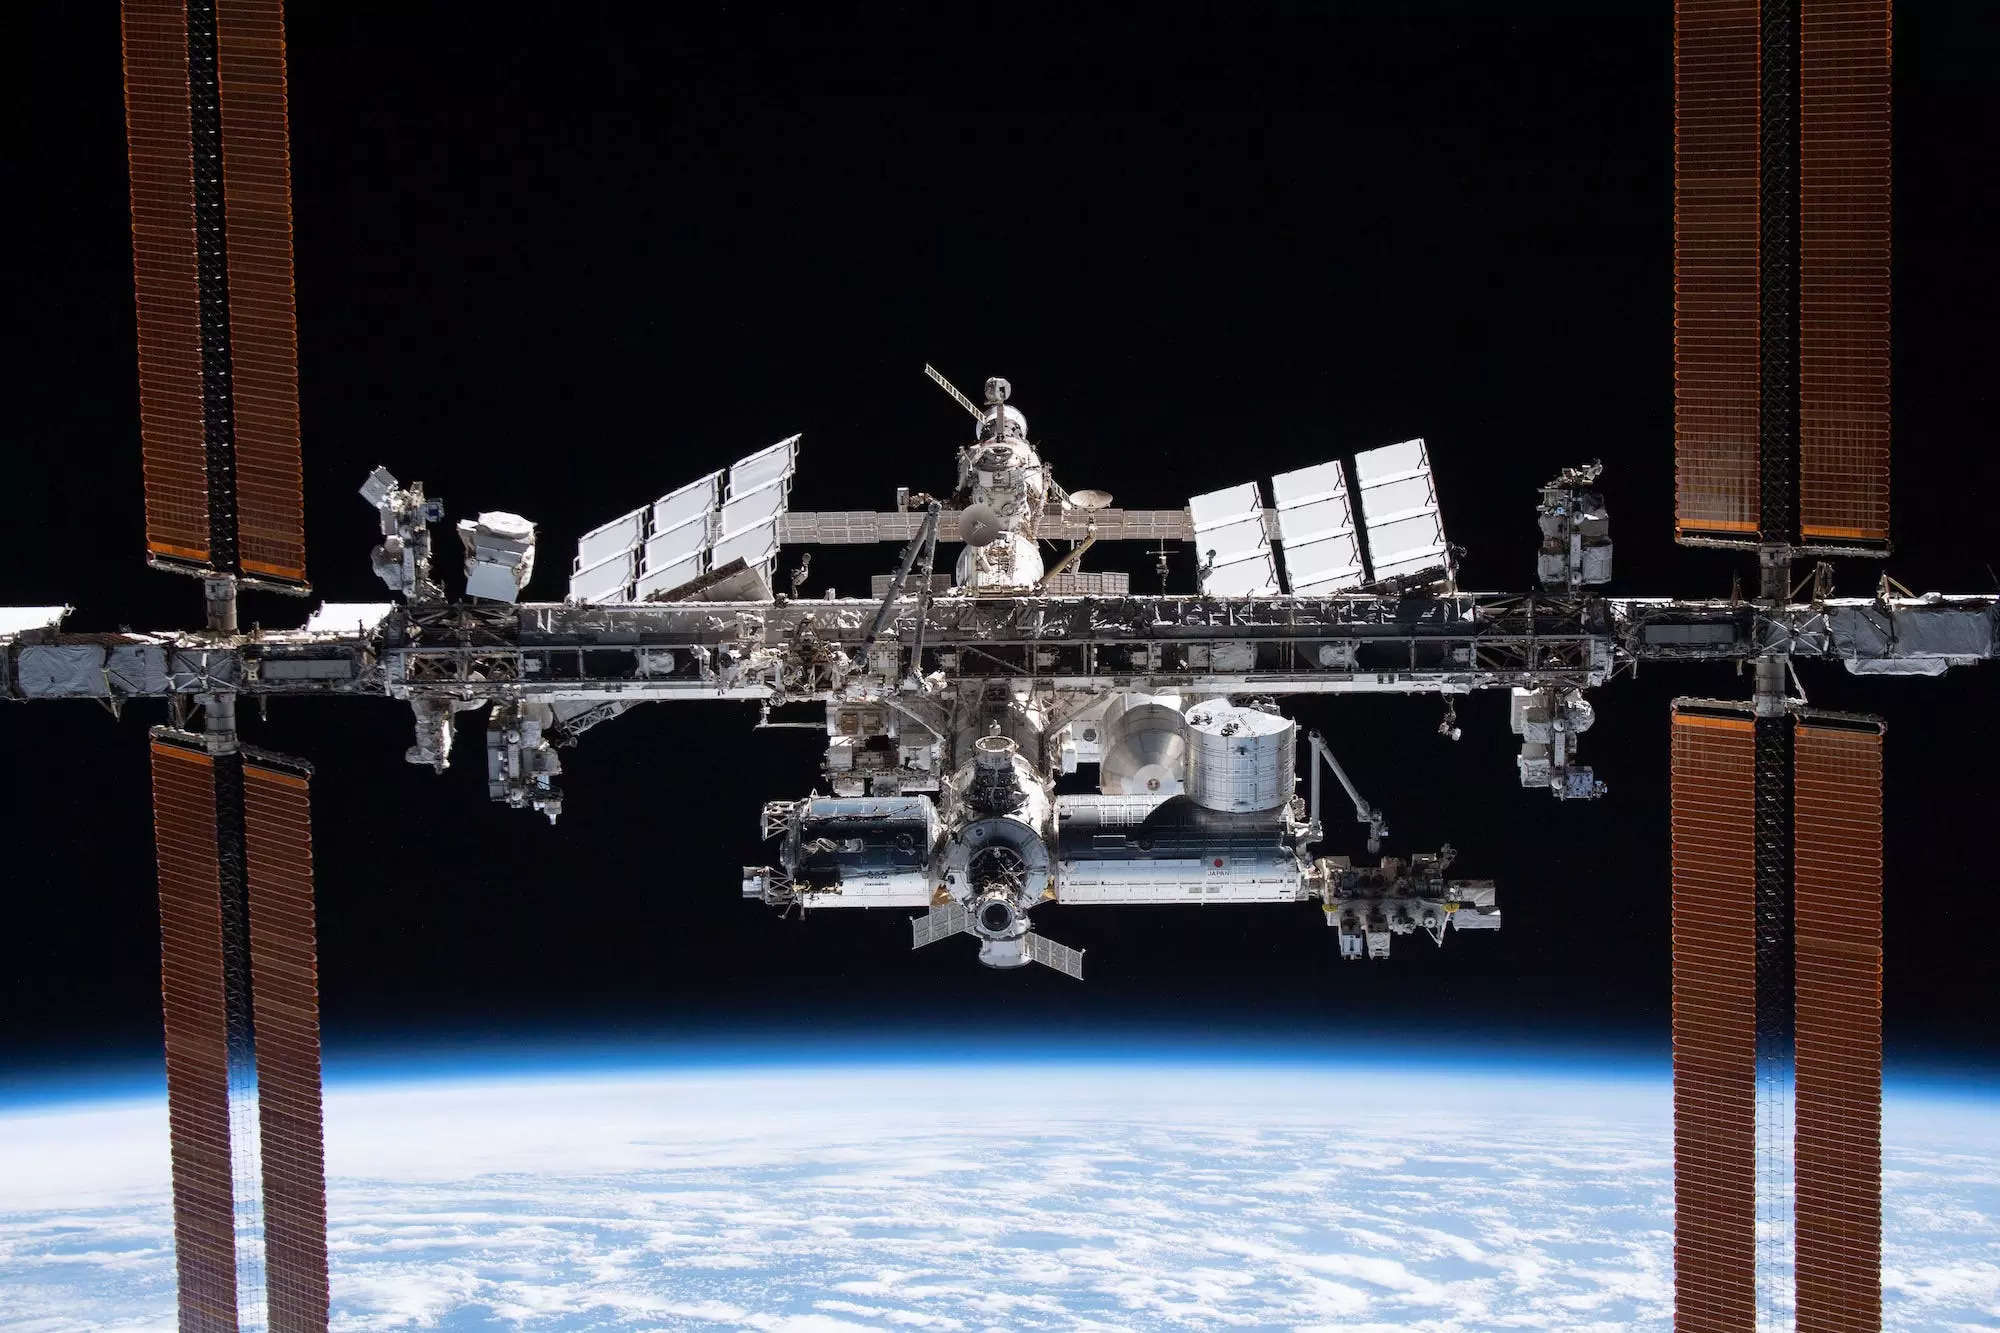 Russia will withdraw from the International Space Station due to economic sanctions: report